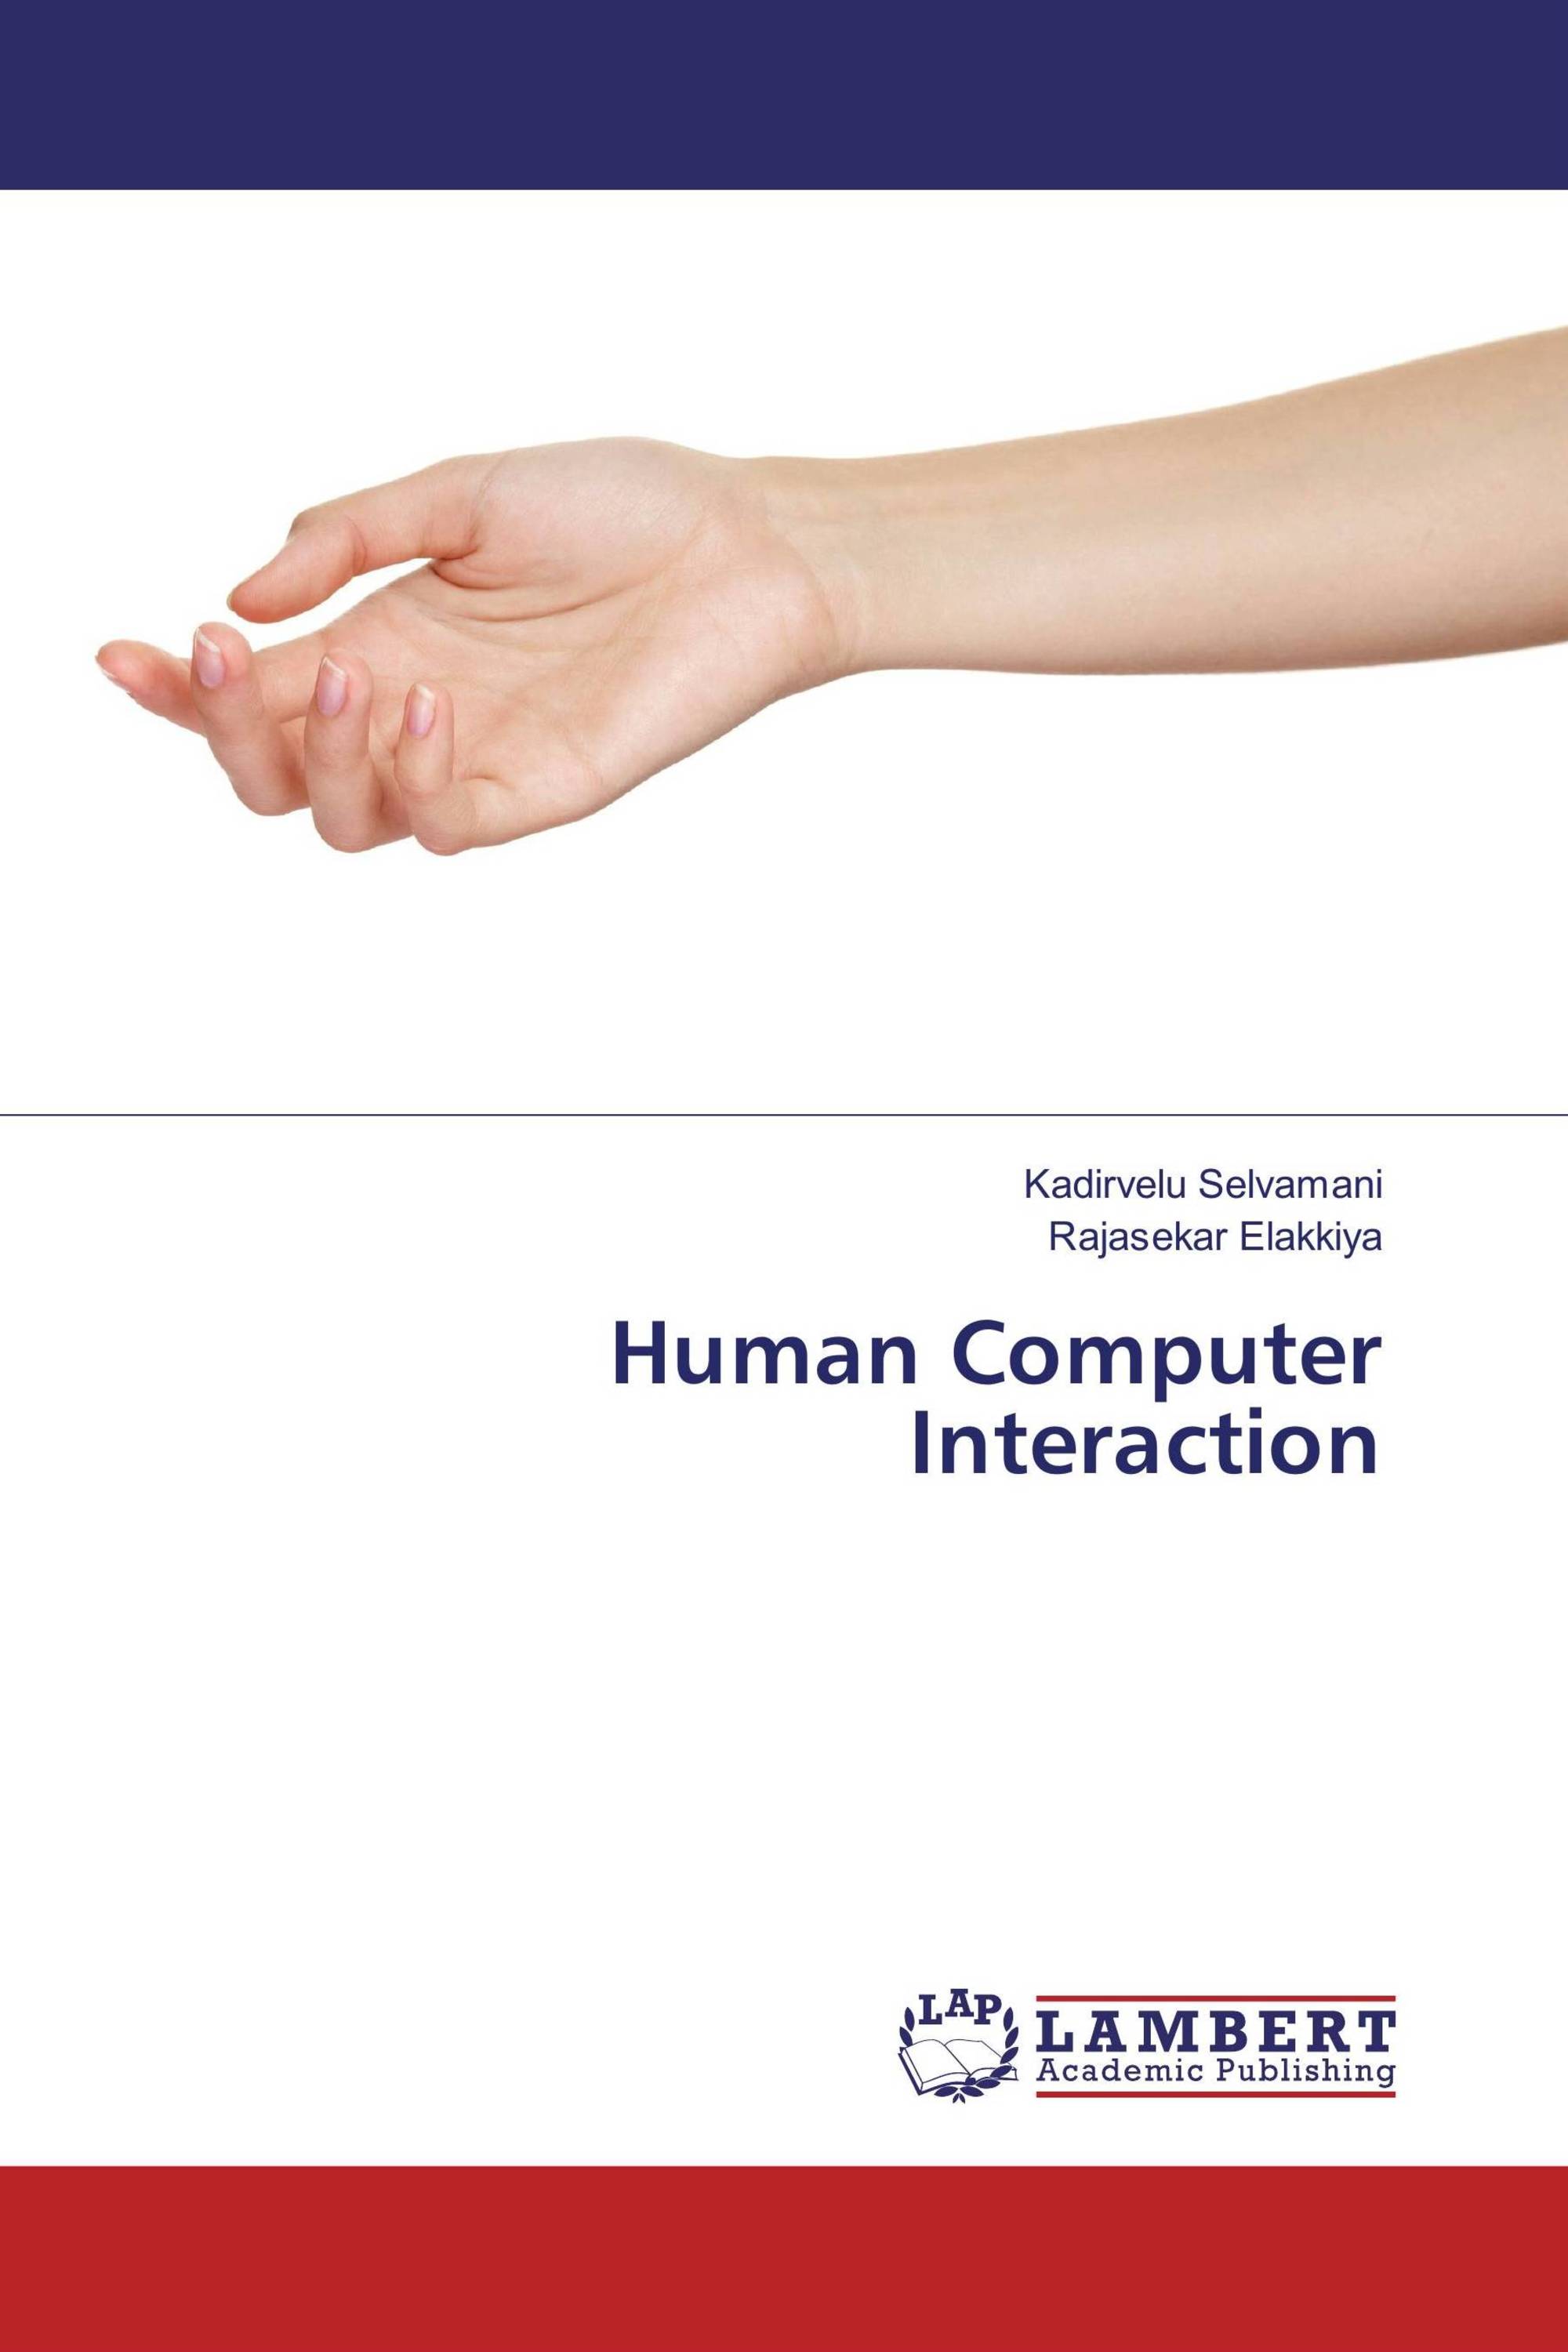 research paper on human computer interaction